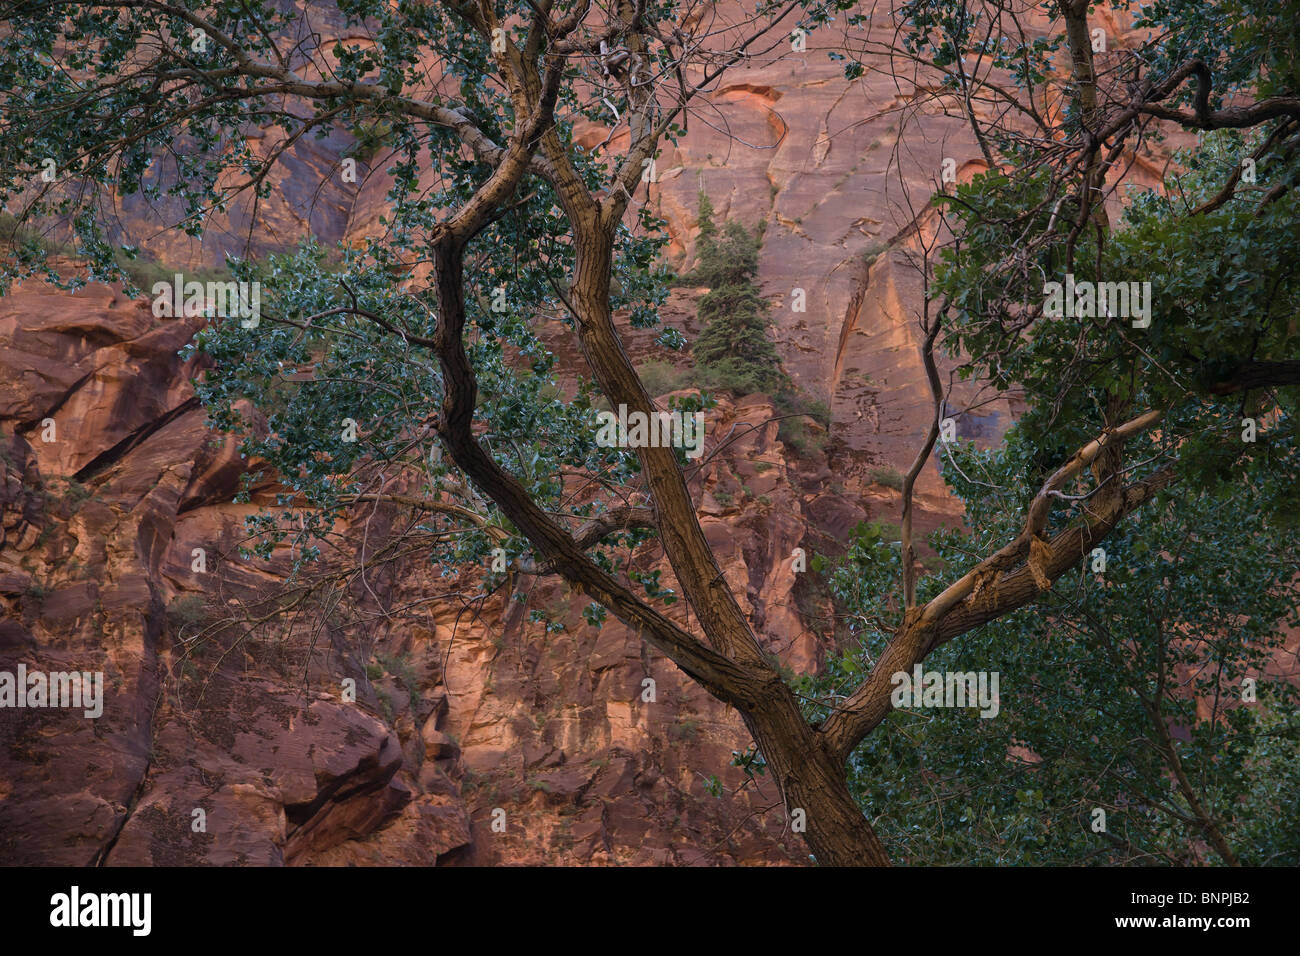 Zion Canyon National Park, Utah, USA - tree against red sandstone rocks Stock Photo